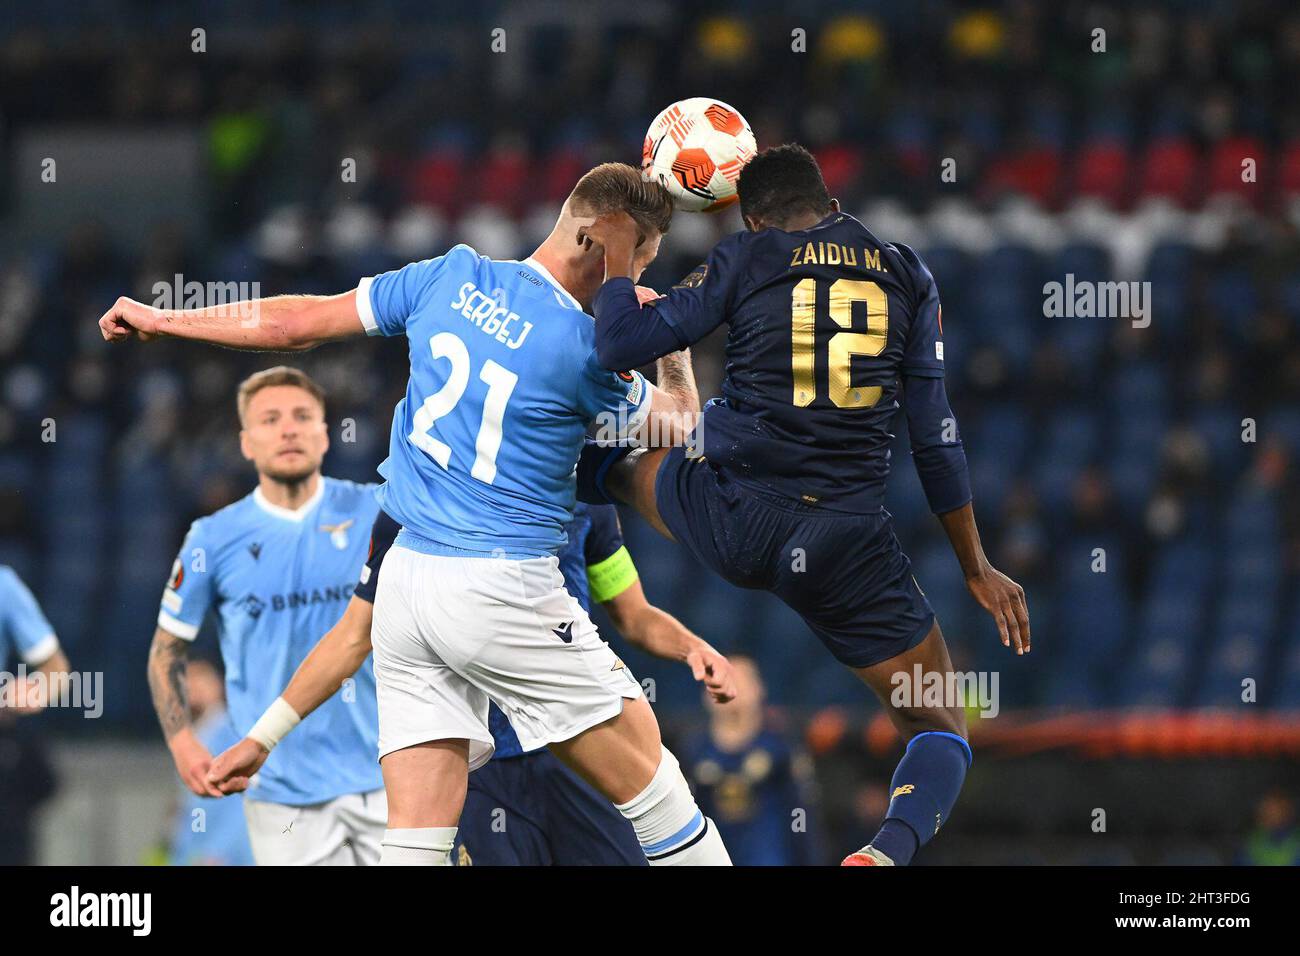 Sergej Milinkovi?-Savi? of SS LAZIO and Zaidu of F.C. Porto in action during the Knockout Round Play-Offs Leg Two - UEFA Europa League between SS Lazio and FC Porto at Stadio Olimpico on 24th of February, 2022 in Rome, Italy. (Photo by Domenico Cippitelli/Pacific Press/Sipa USA) Stock Photo